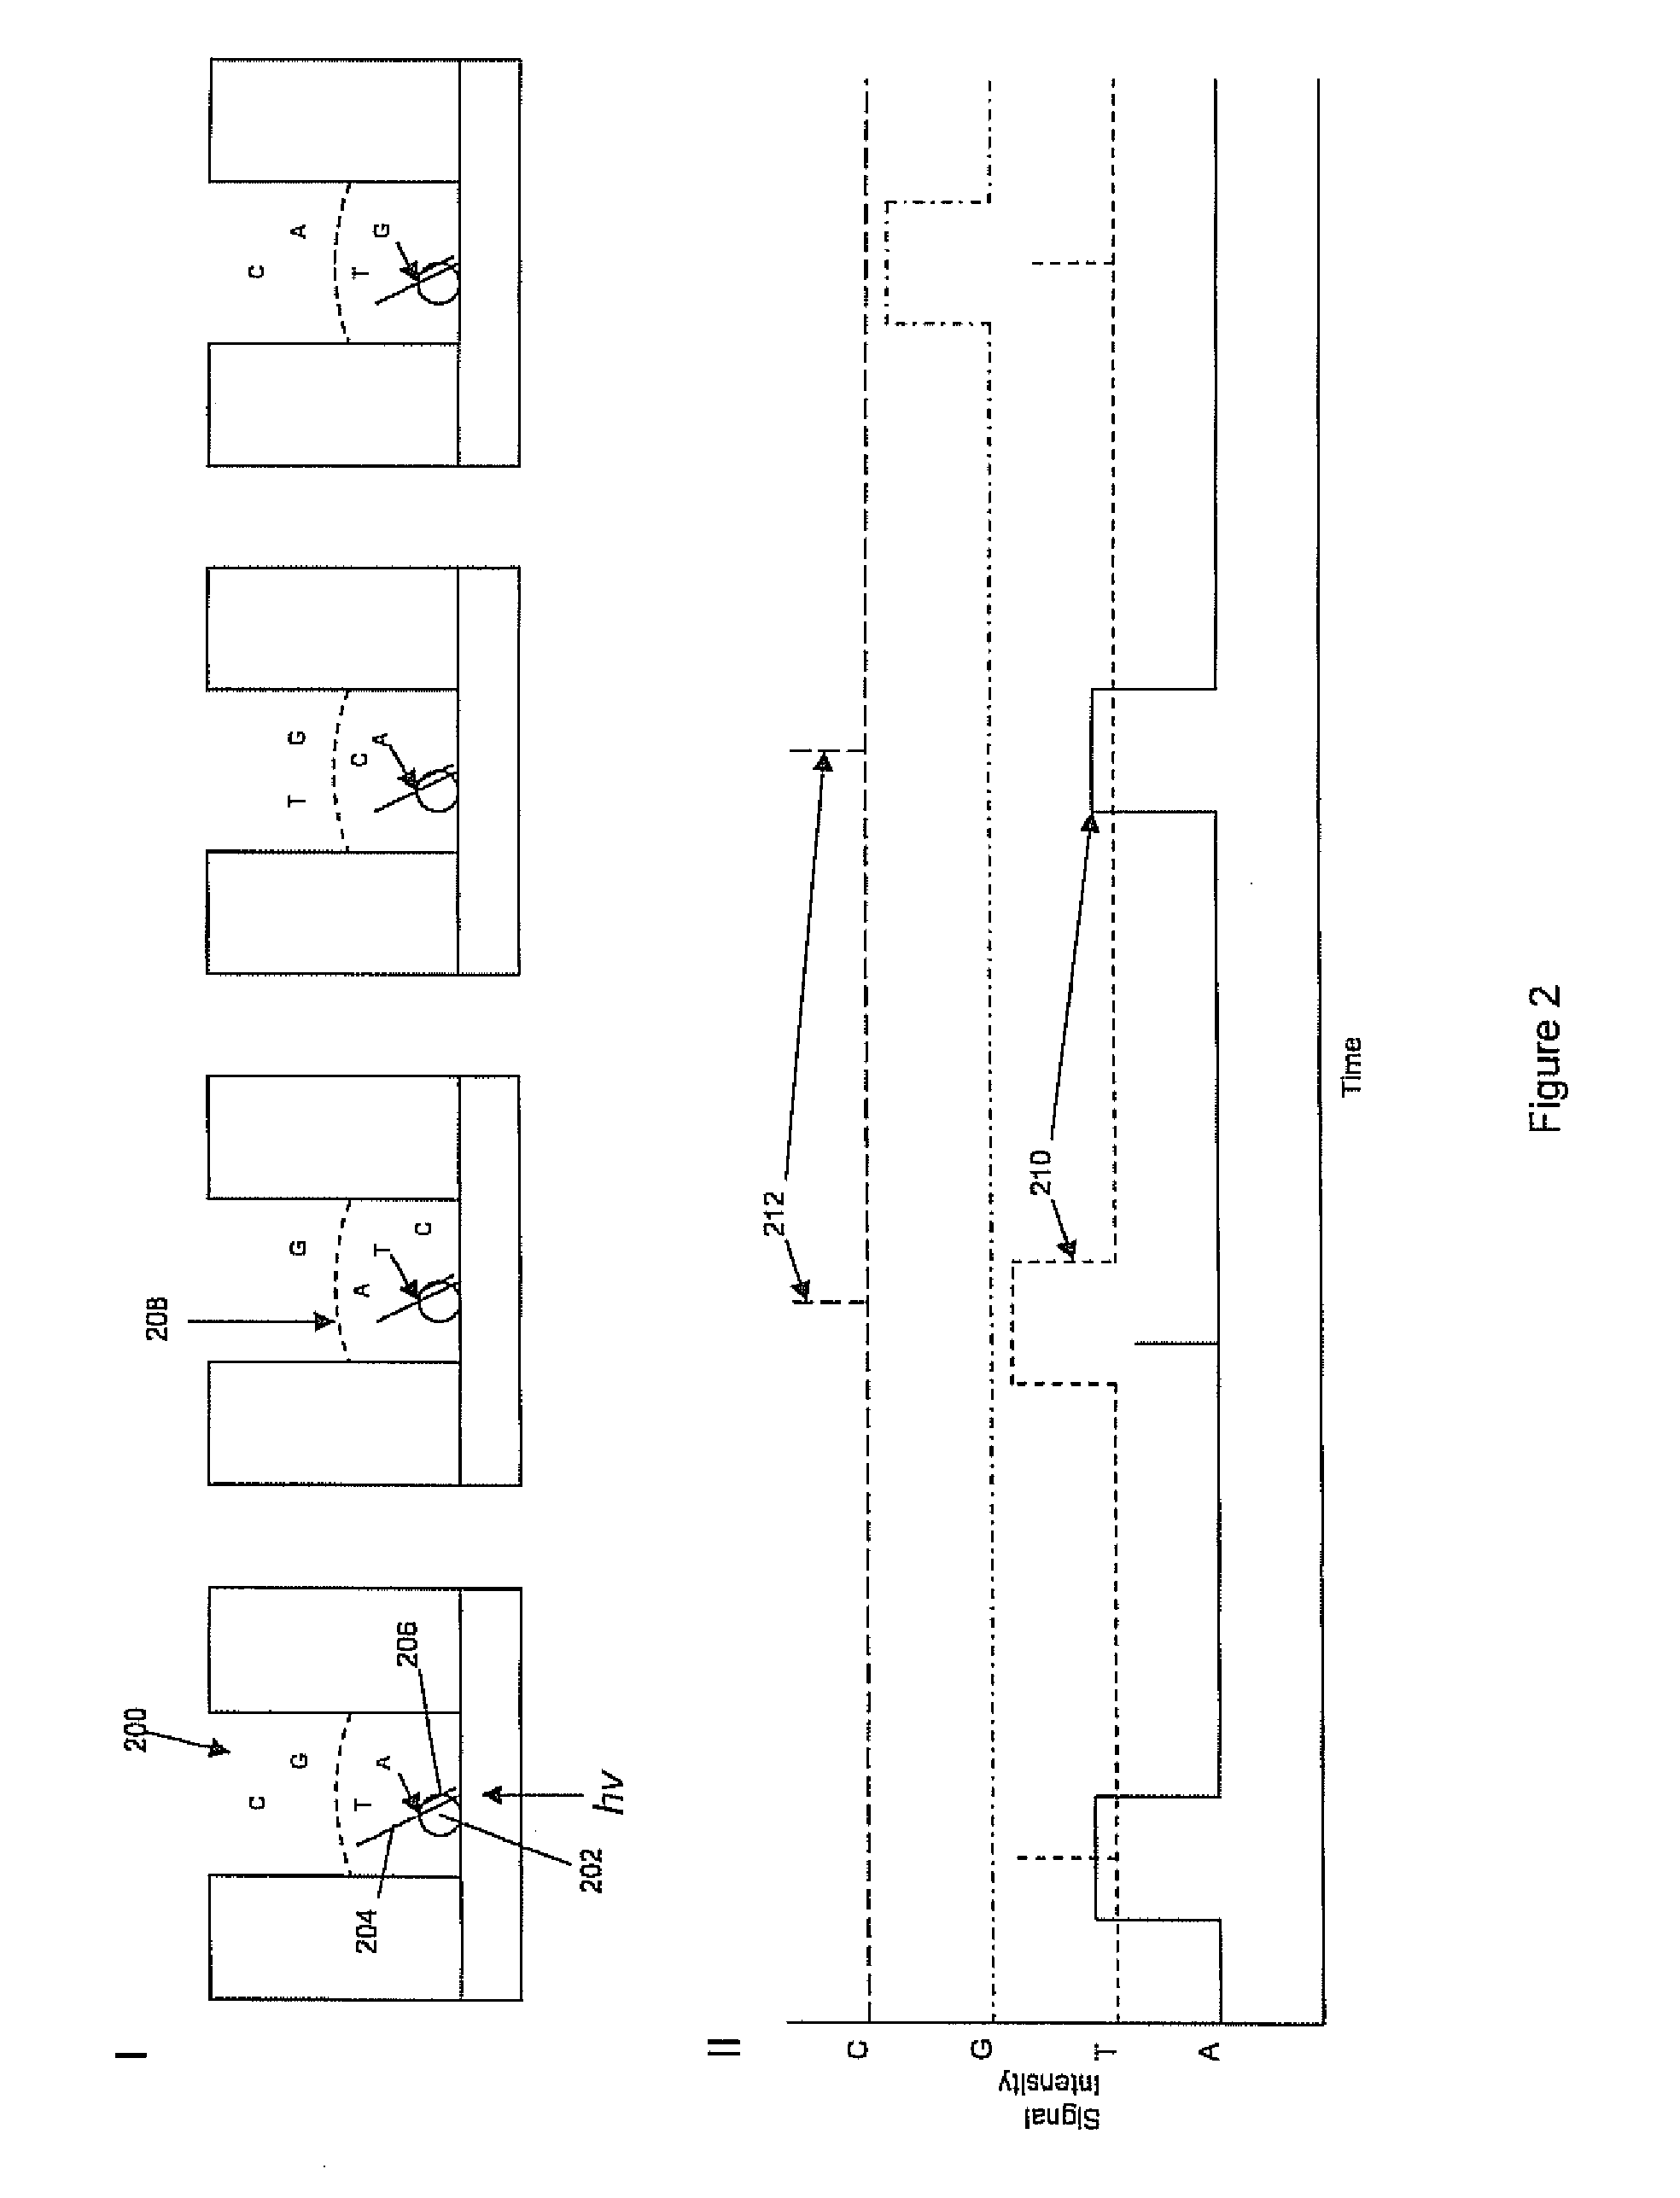 Nucleic acid synthesis compositions and methods and systems for using same